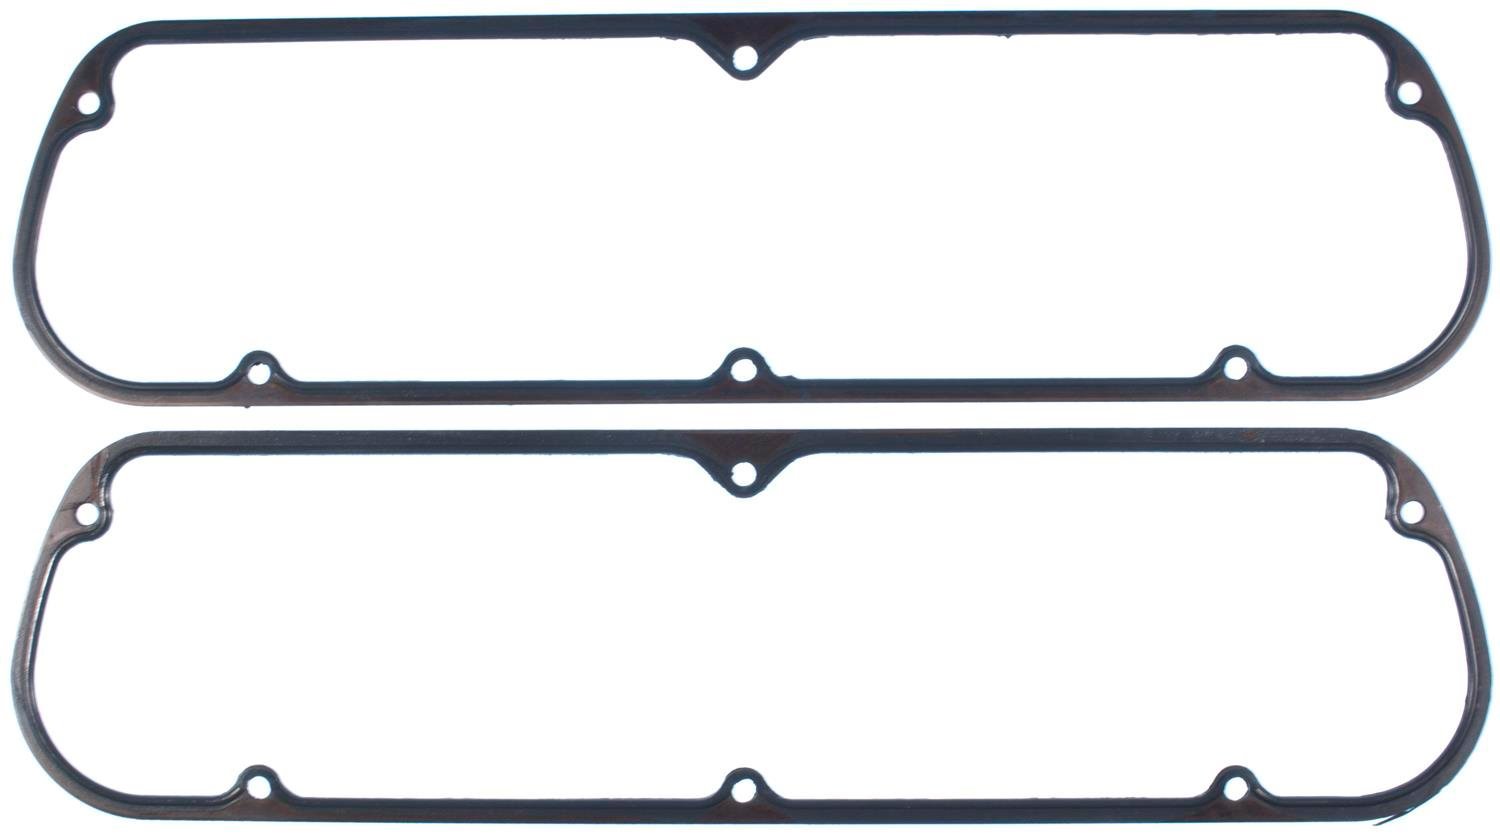 Valve Cover Gasket Set for Small Block Ford